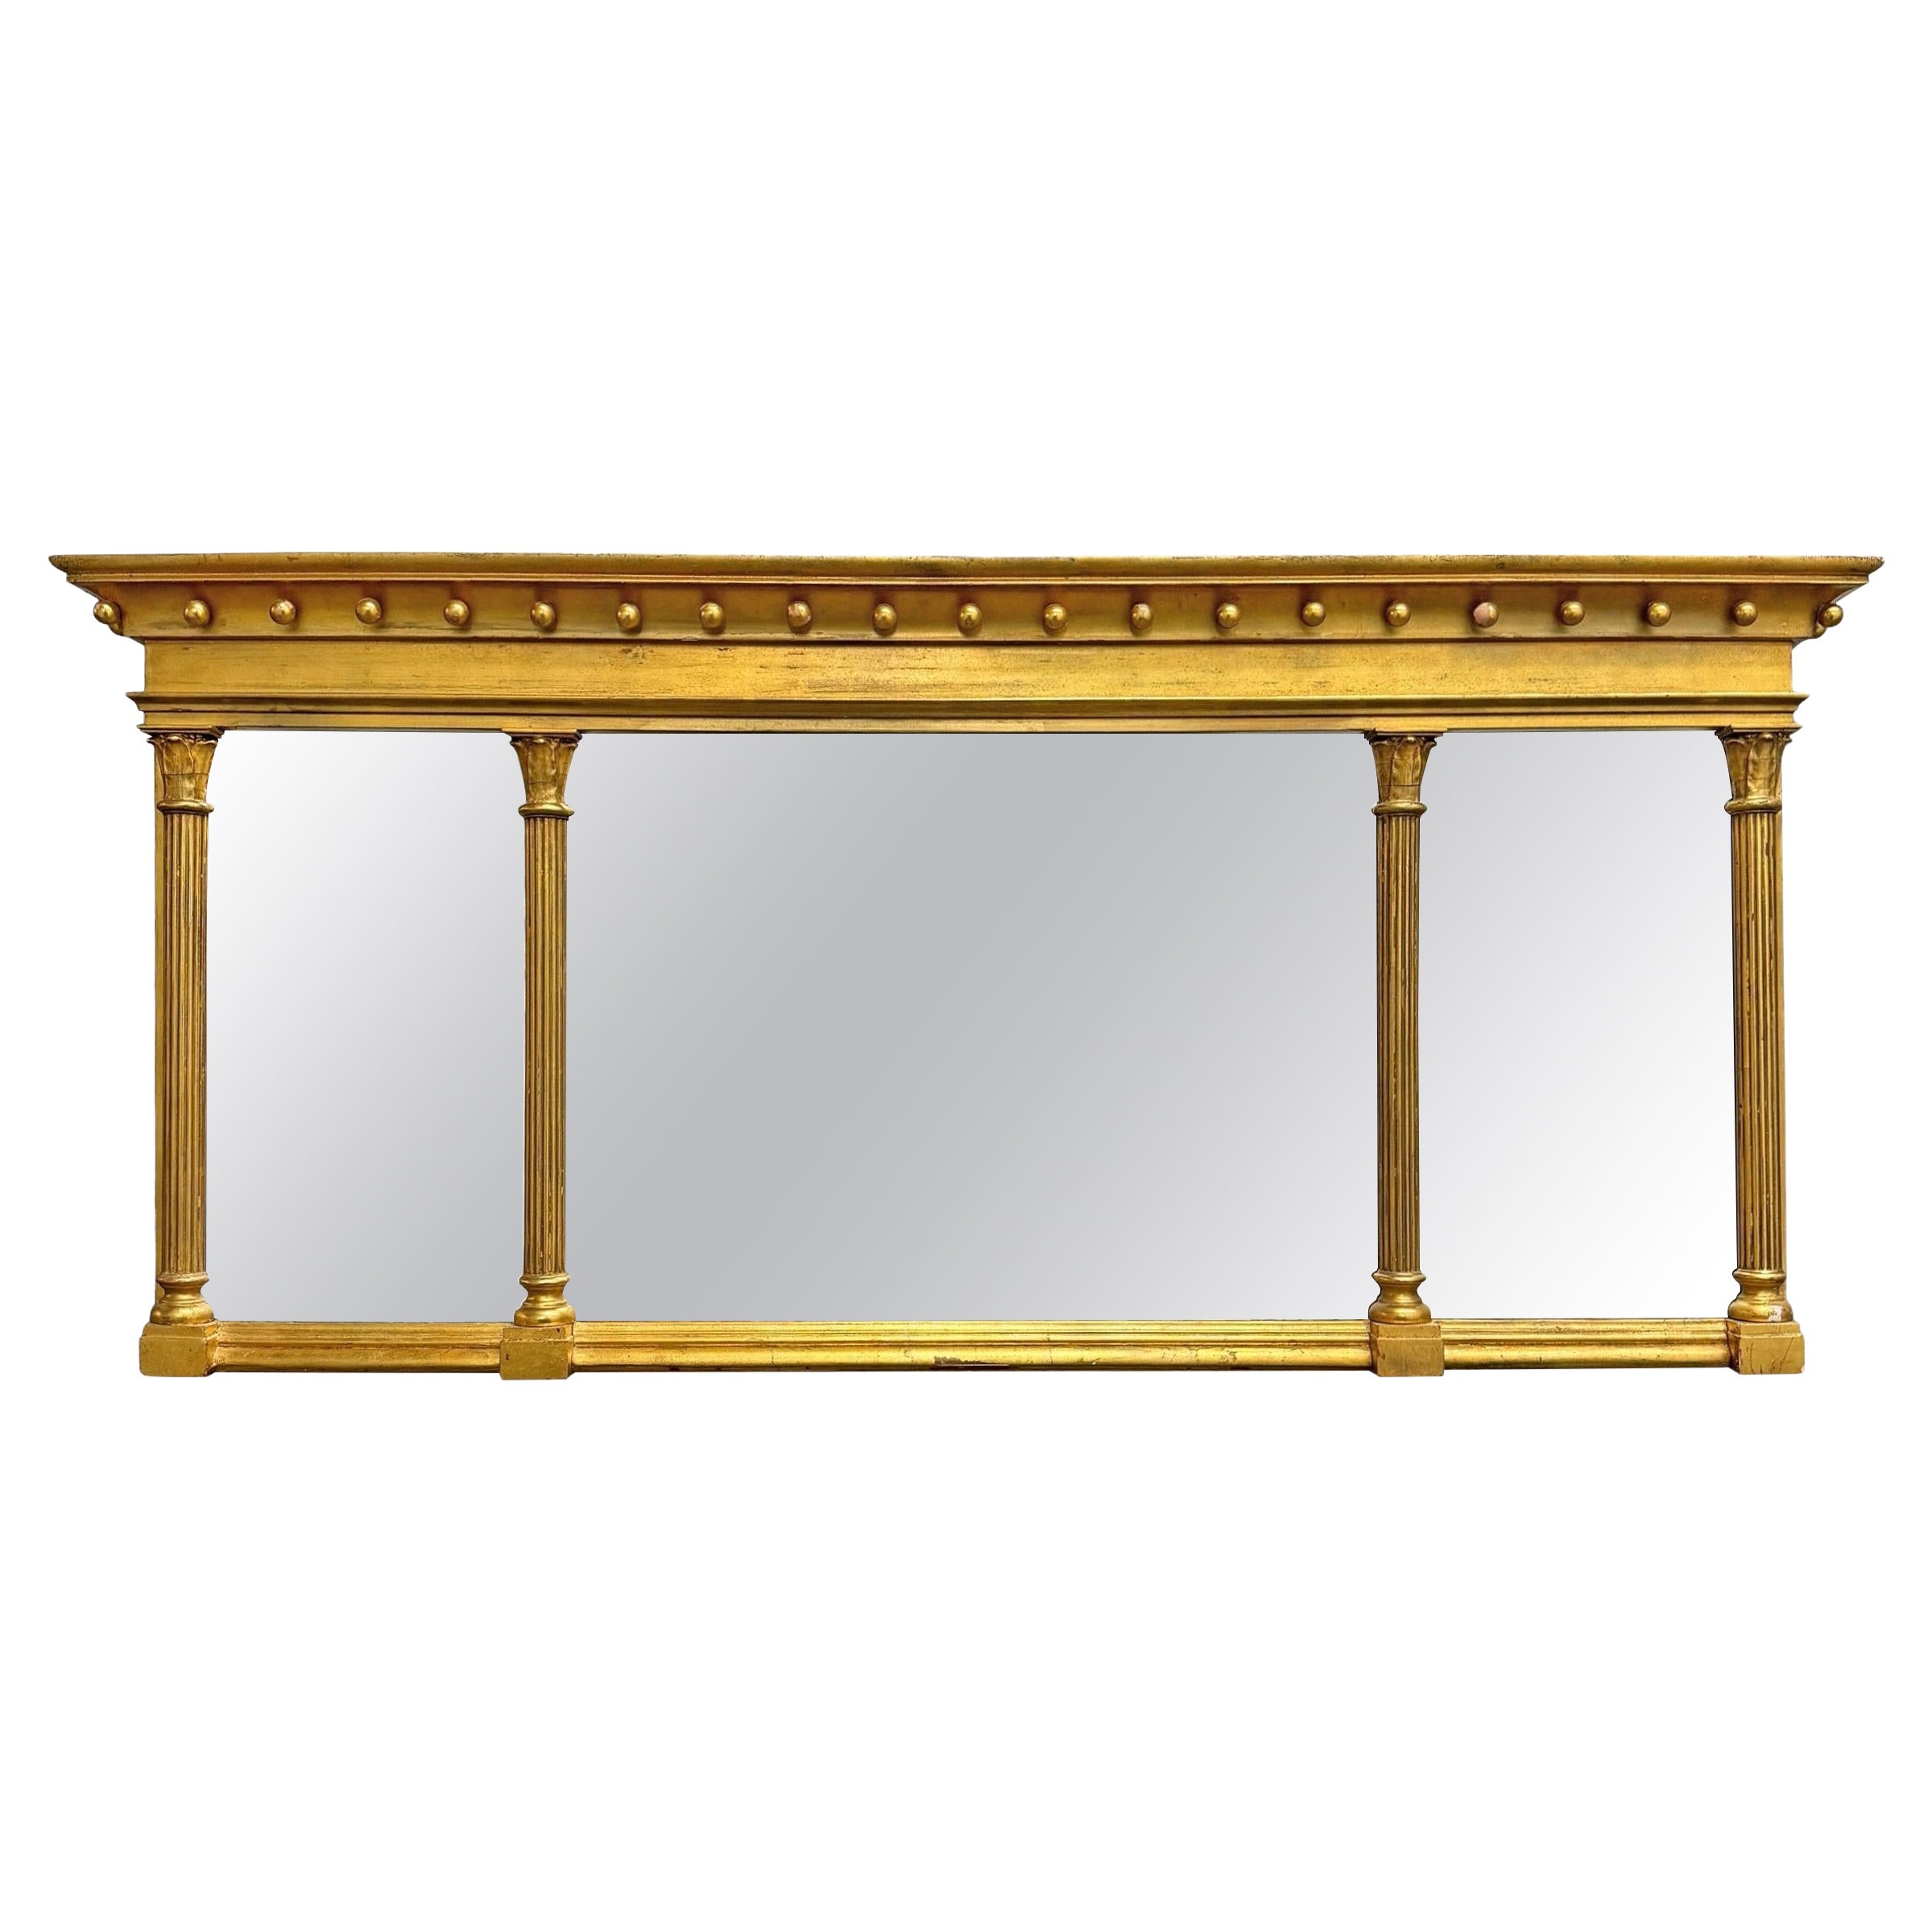 19th Century American Federal Style Overmantel Mirror For Sale